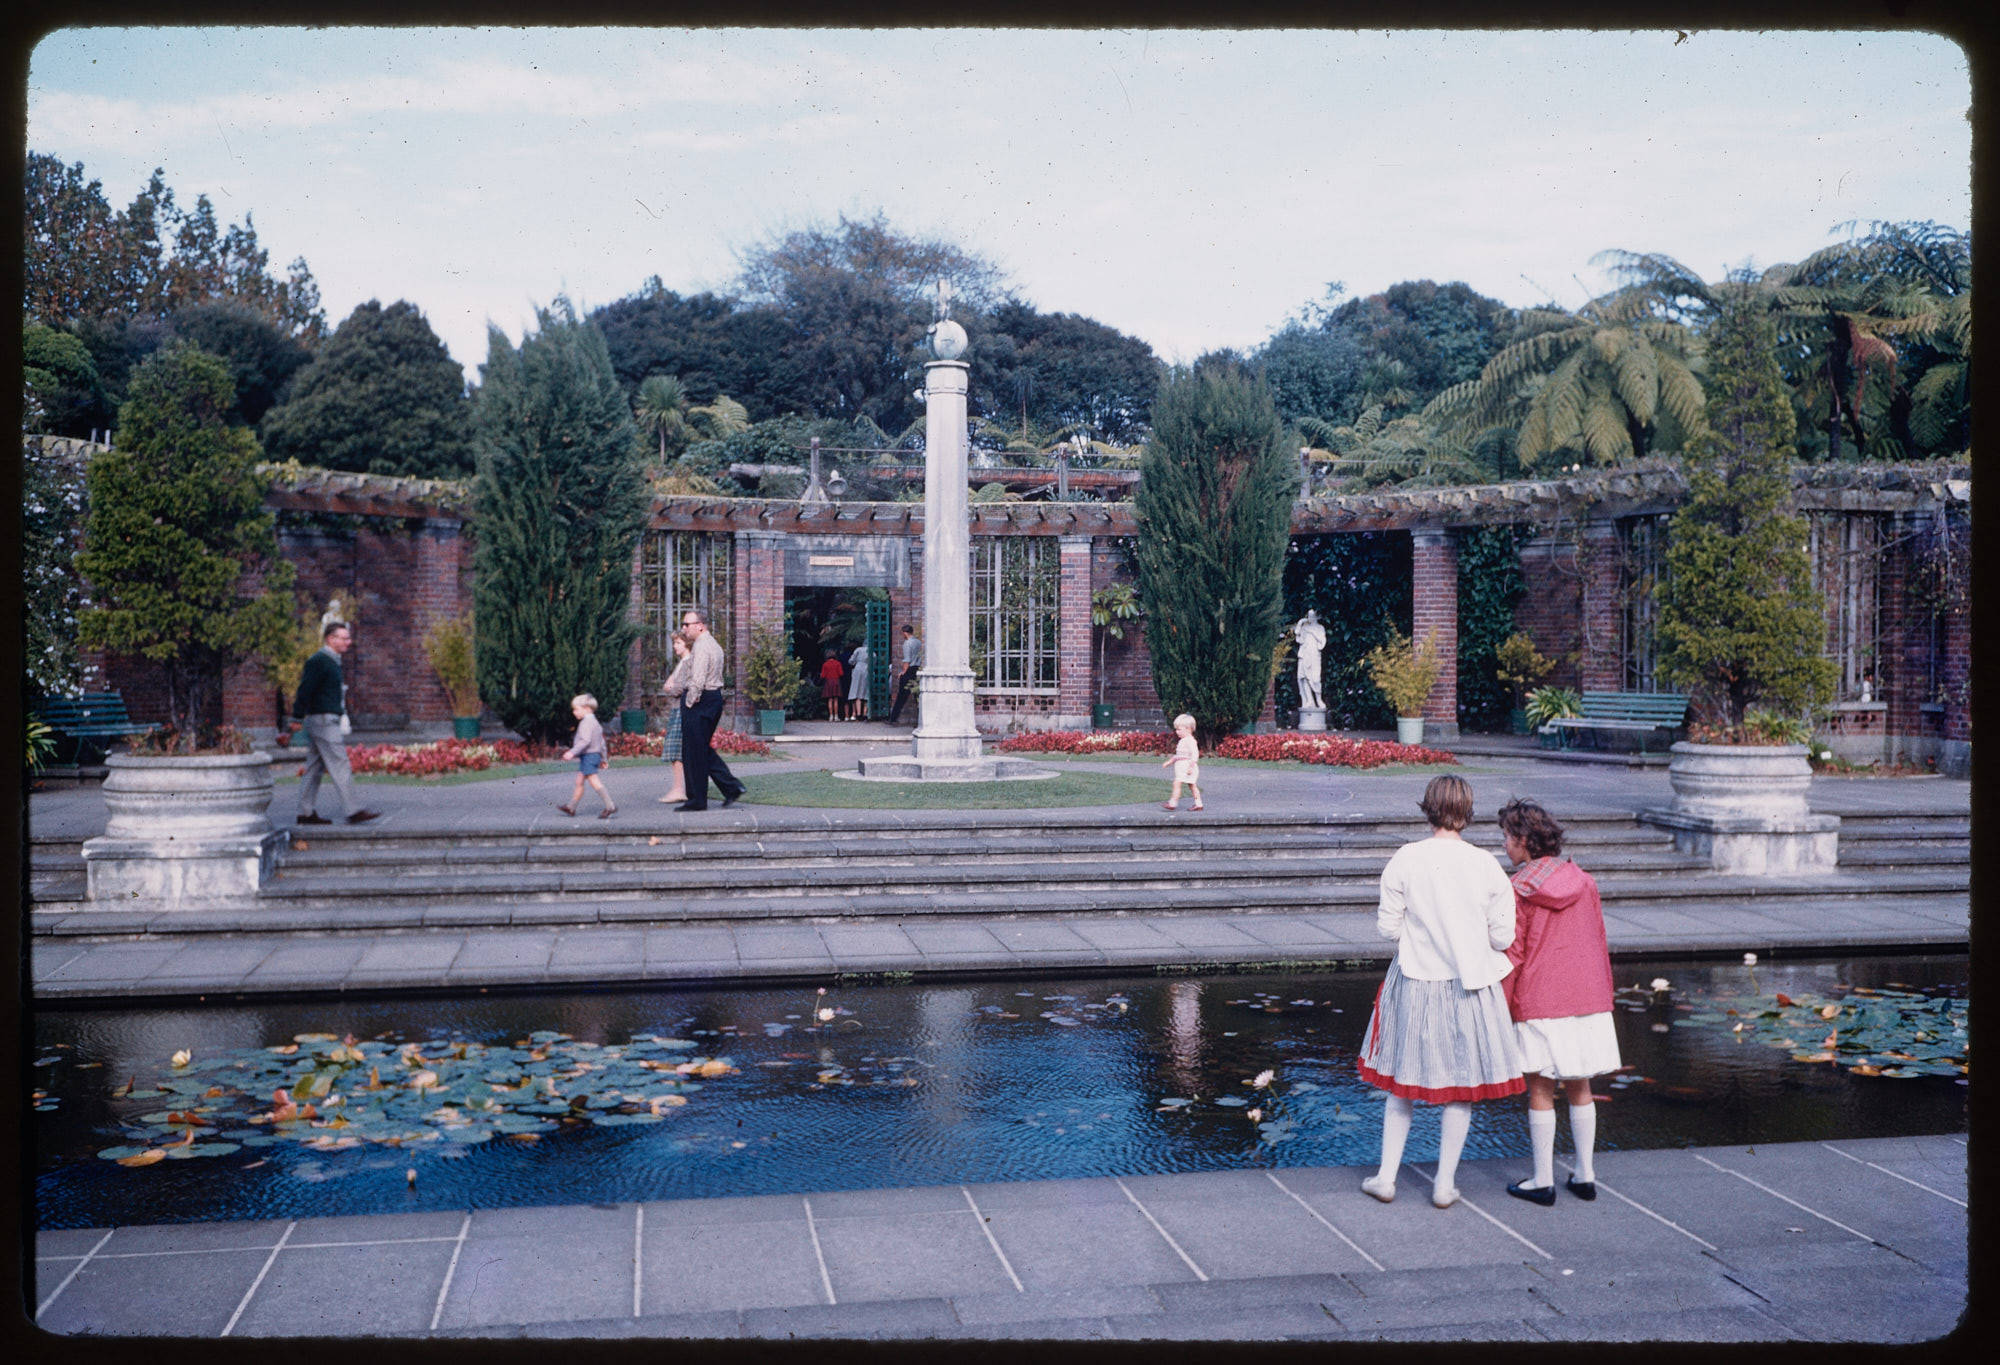 The Wintergardens in the 1960s. Credit Auckland Libraries Heritage Collections 1437-09